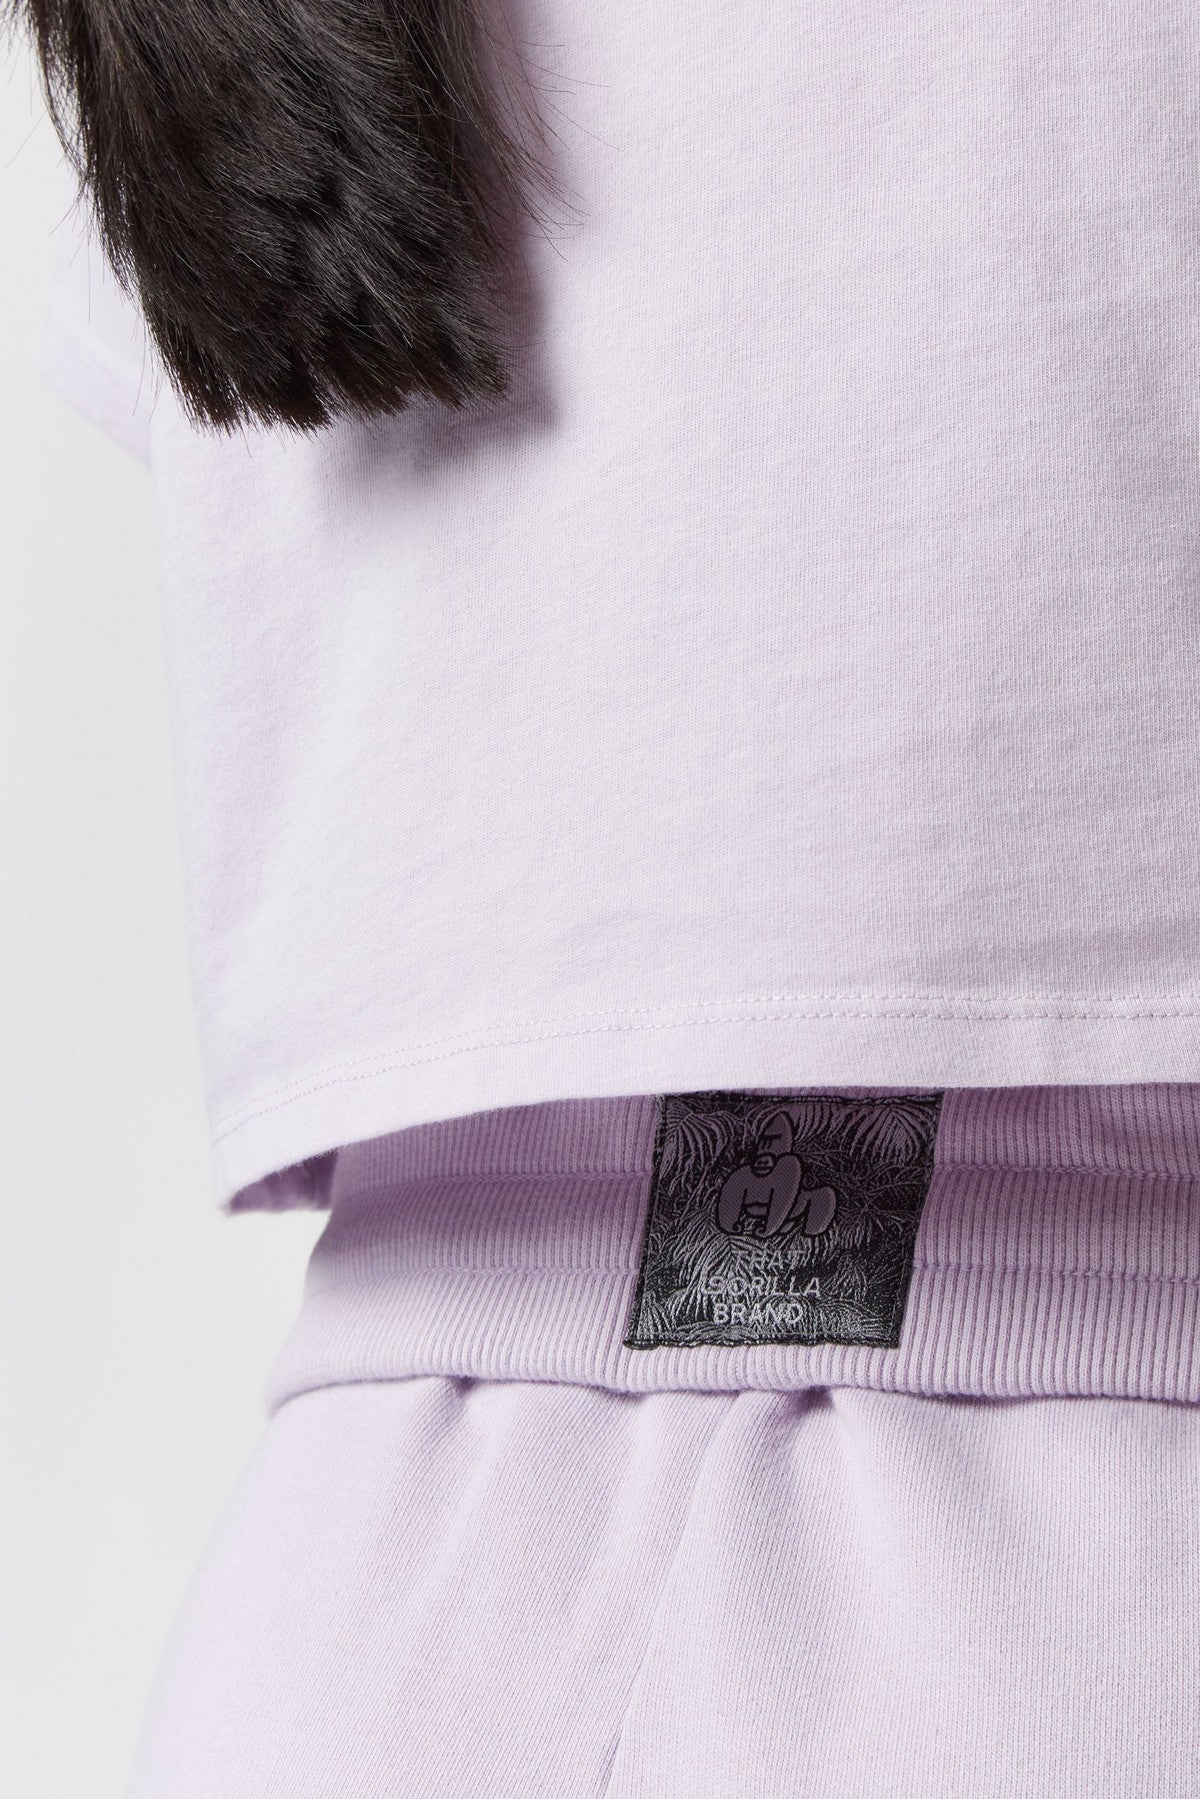 MAJI 'G' COLLECTION JOGGERS - LILAC - THAT GORILLA BRAND